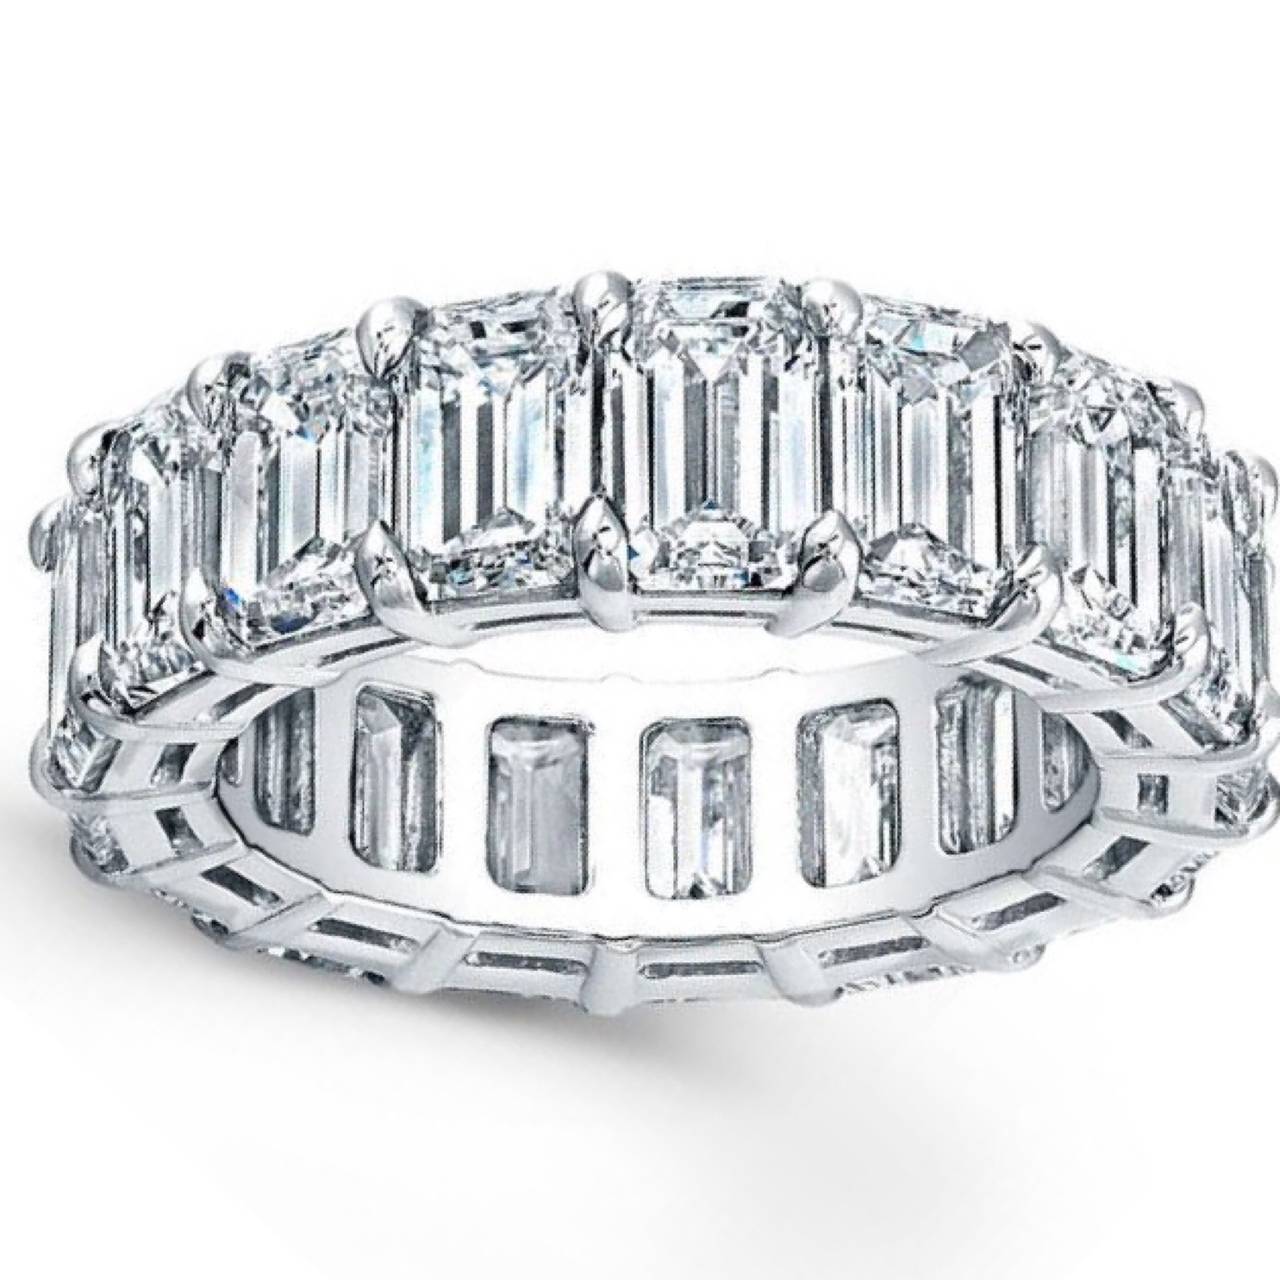 Set in our hand made platinum mounting you will feel the richness to this ring the moment you put it on your finger! Based on a standard size 7 ( available in sizes 4-13) this ring features excellent cut emerald cut diamonds all the way around. The